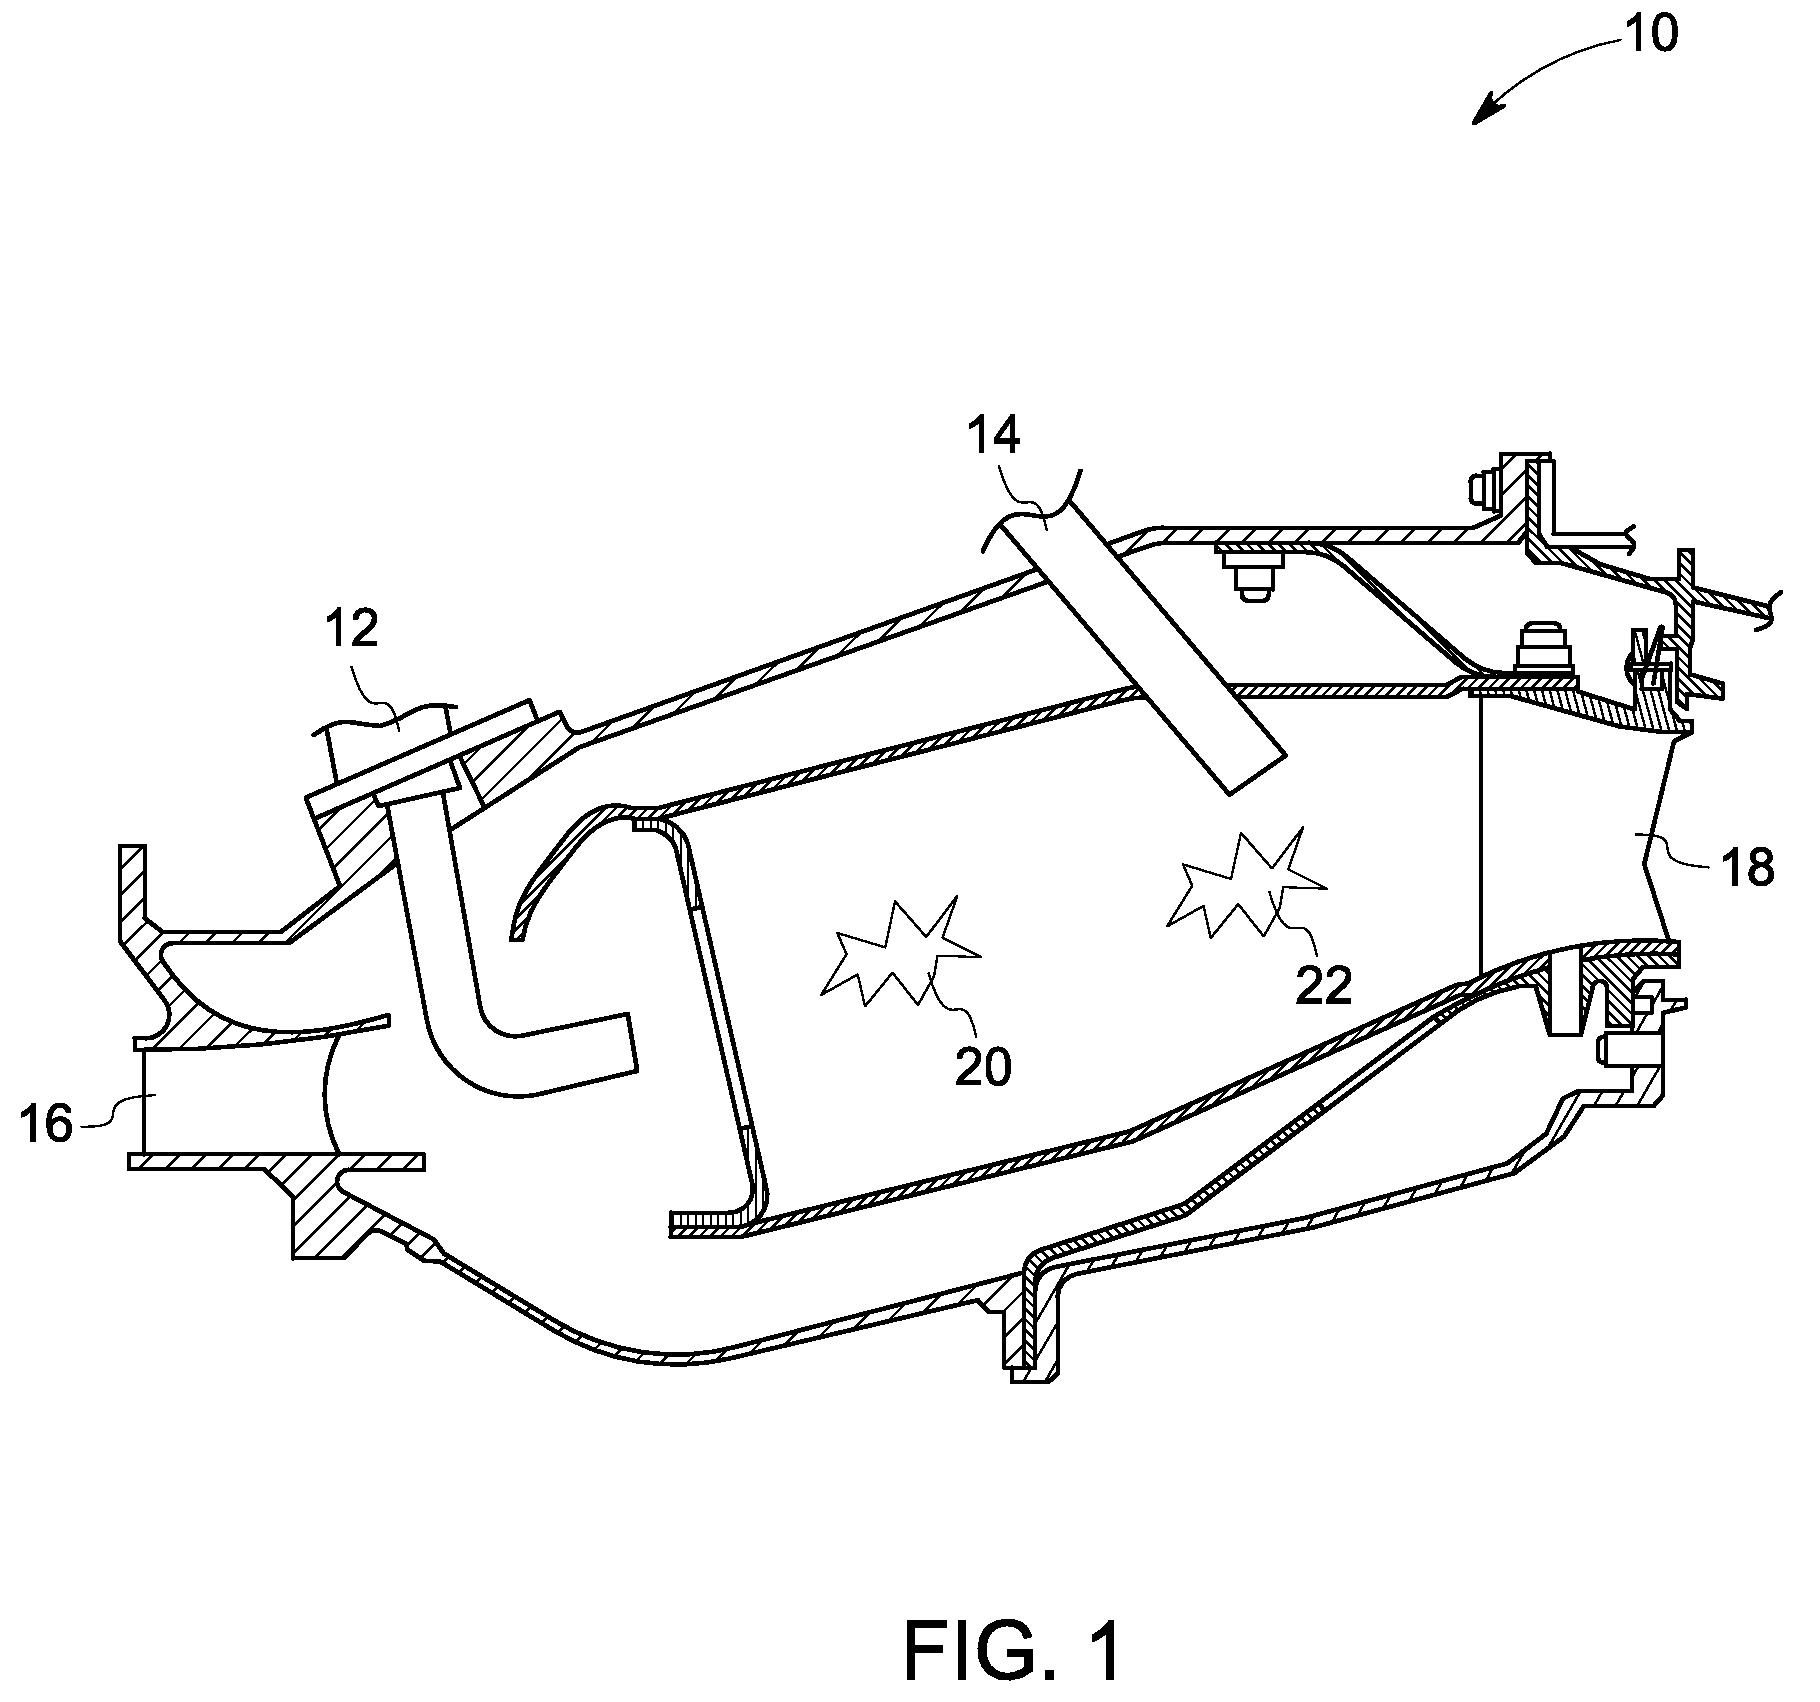 Staged combustion systems and methods